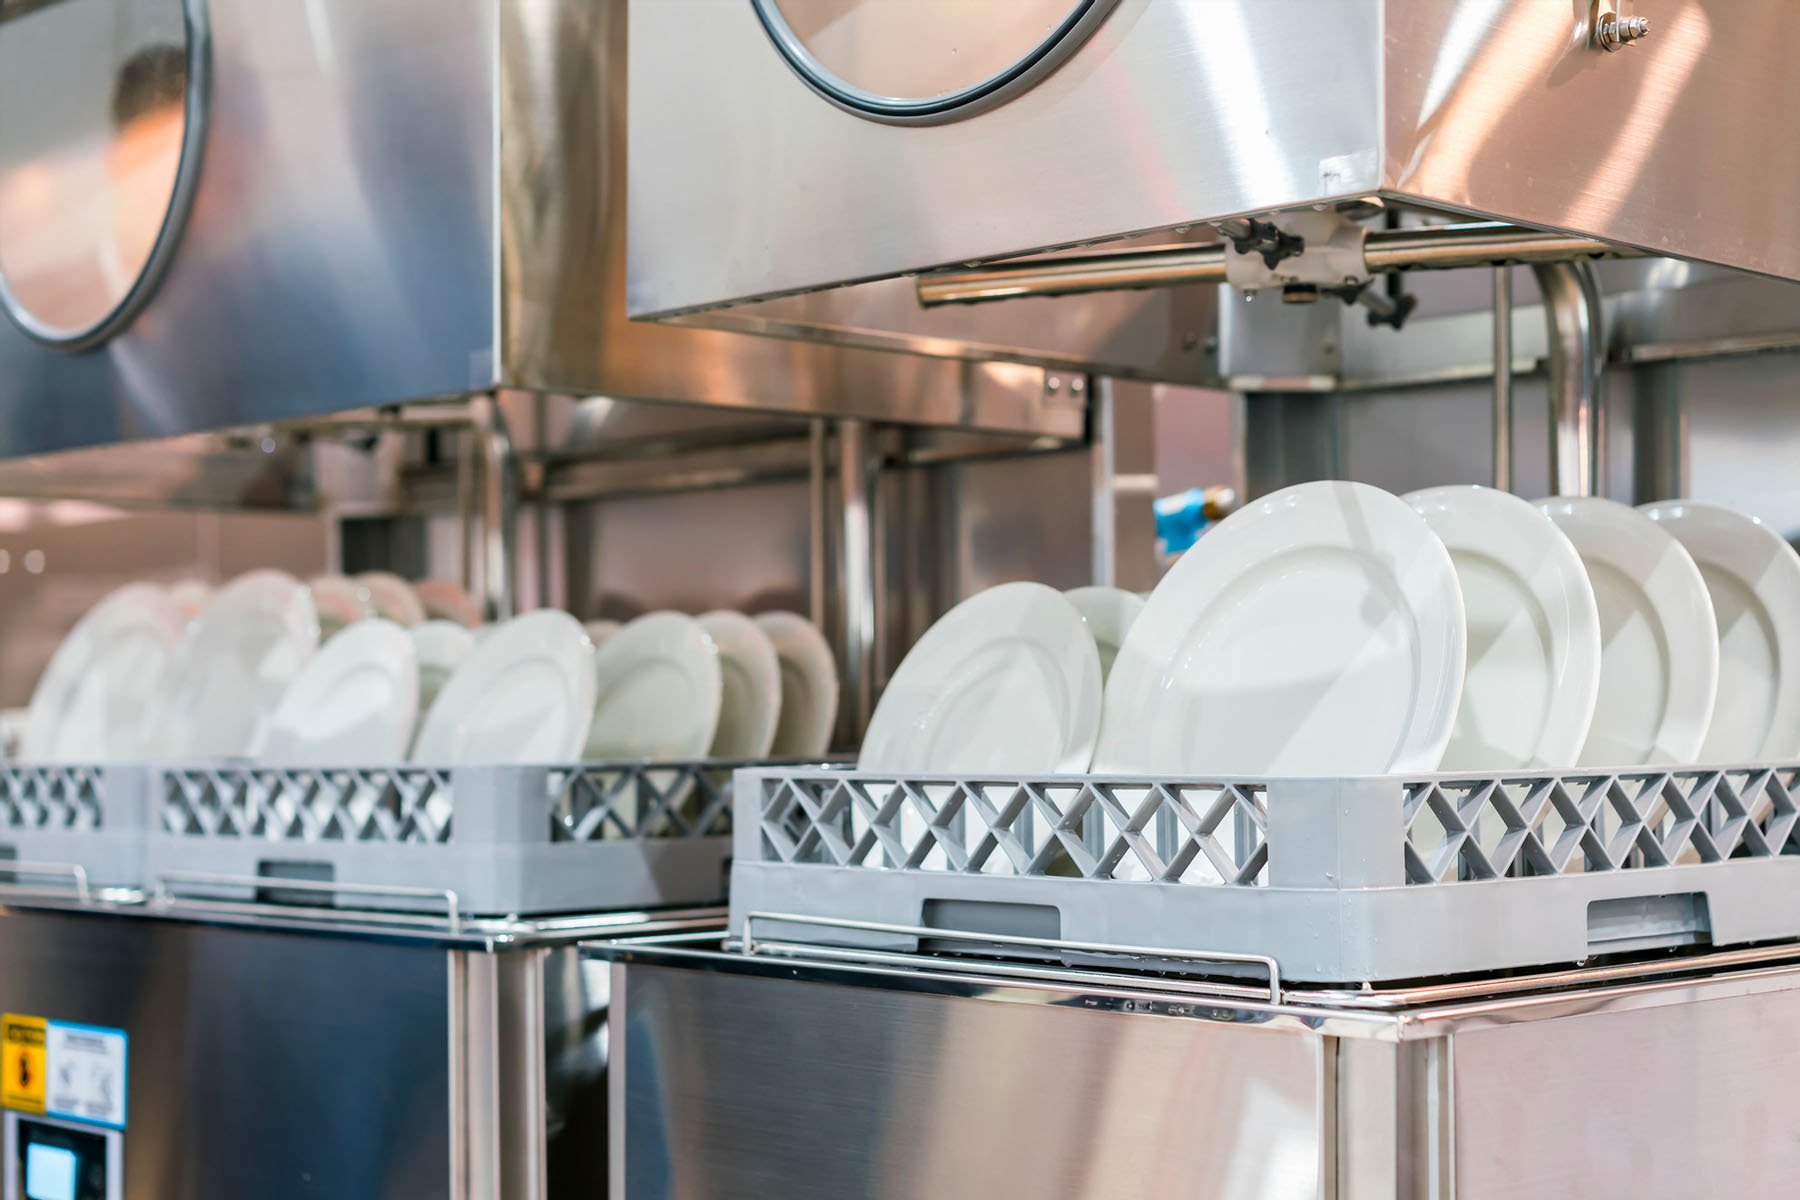 Commercial Dishwasher Buying Guide